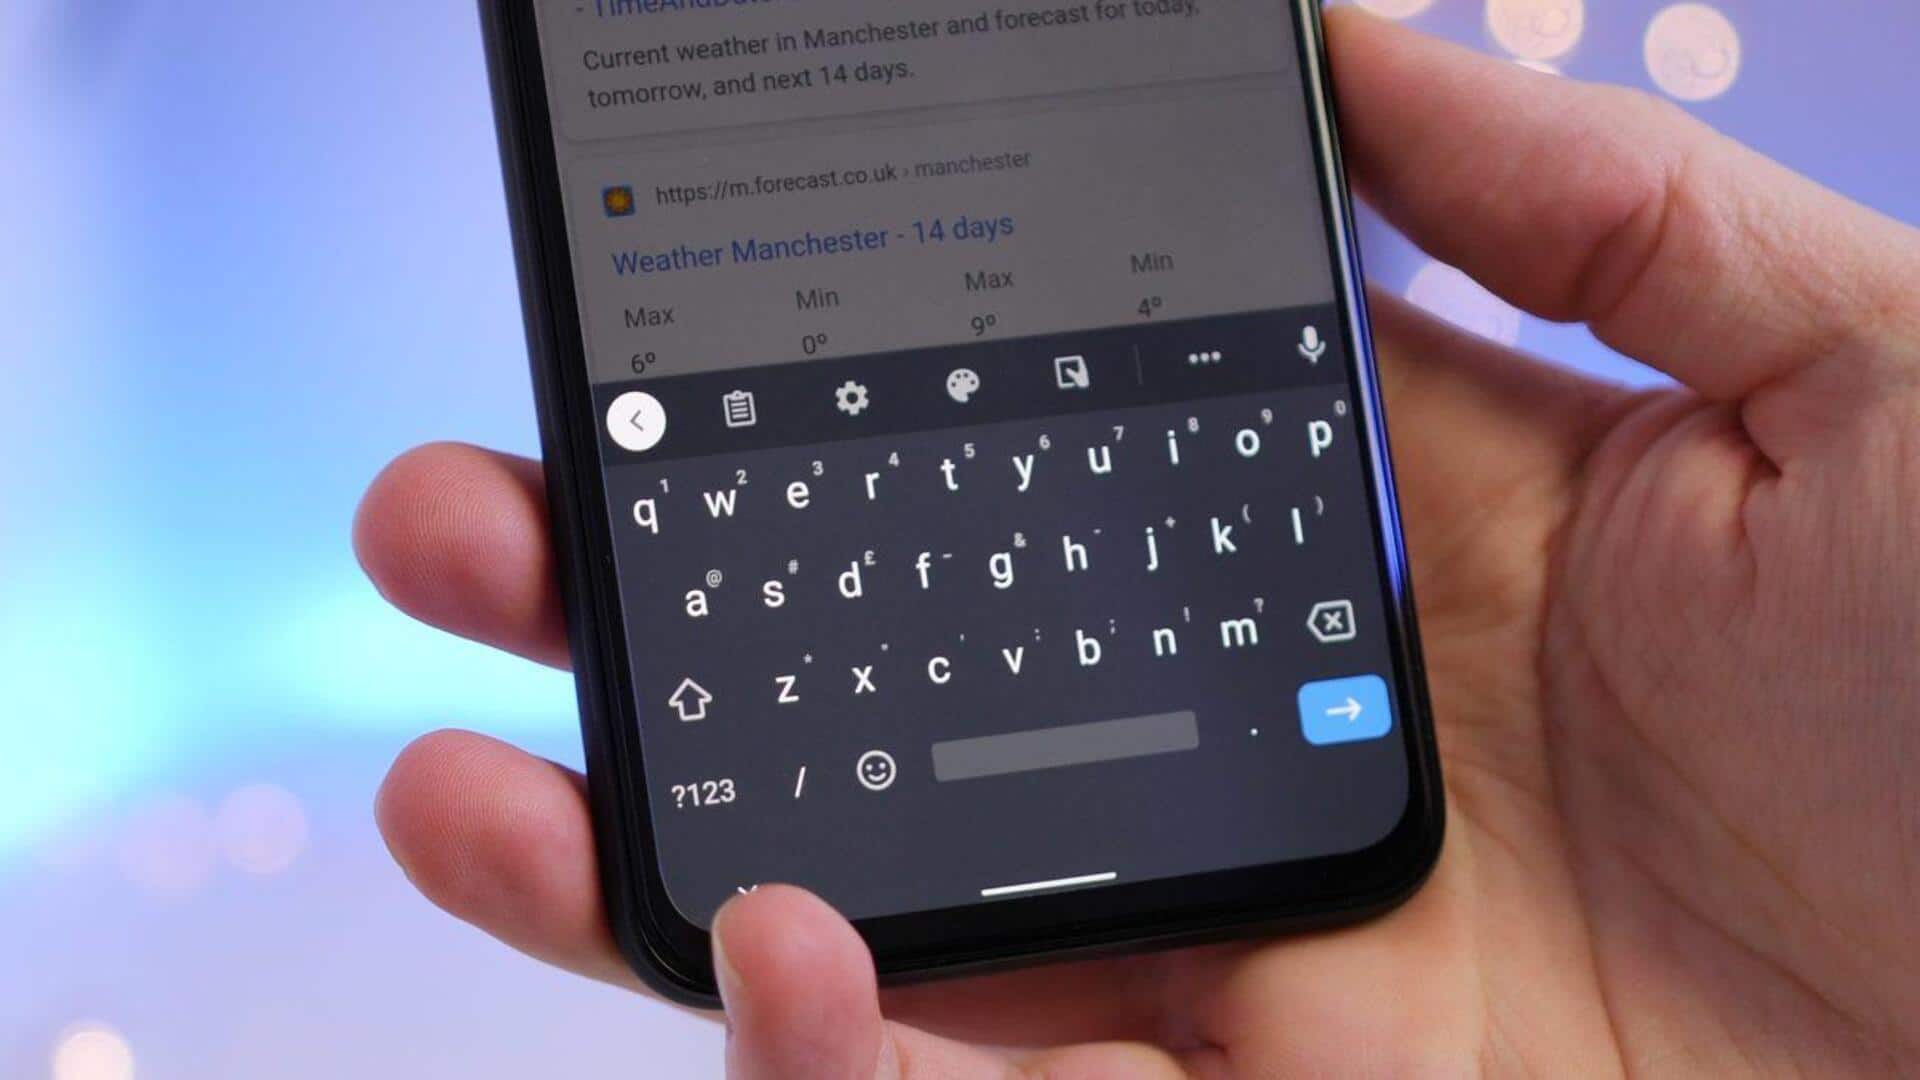 Google's Gboard is developing a 'Seamless Voice Typing' feature